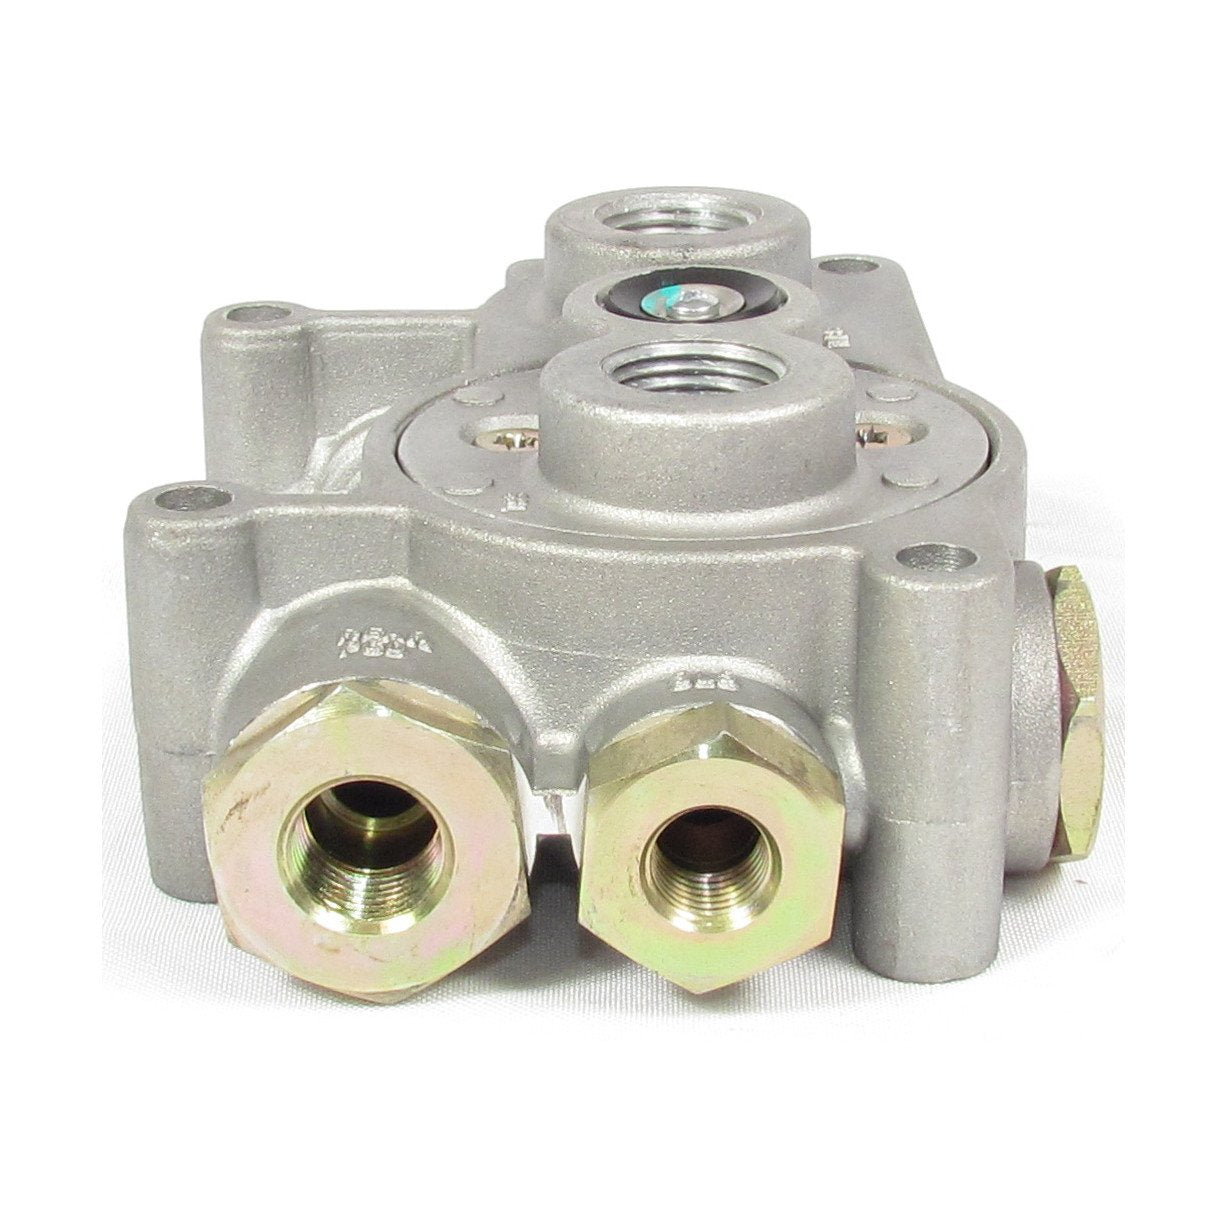 Fortpro TP-5 Type Tractor Protection Valve Replacement for Bendix 288605, Mack 20QE3234 | F224676